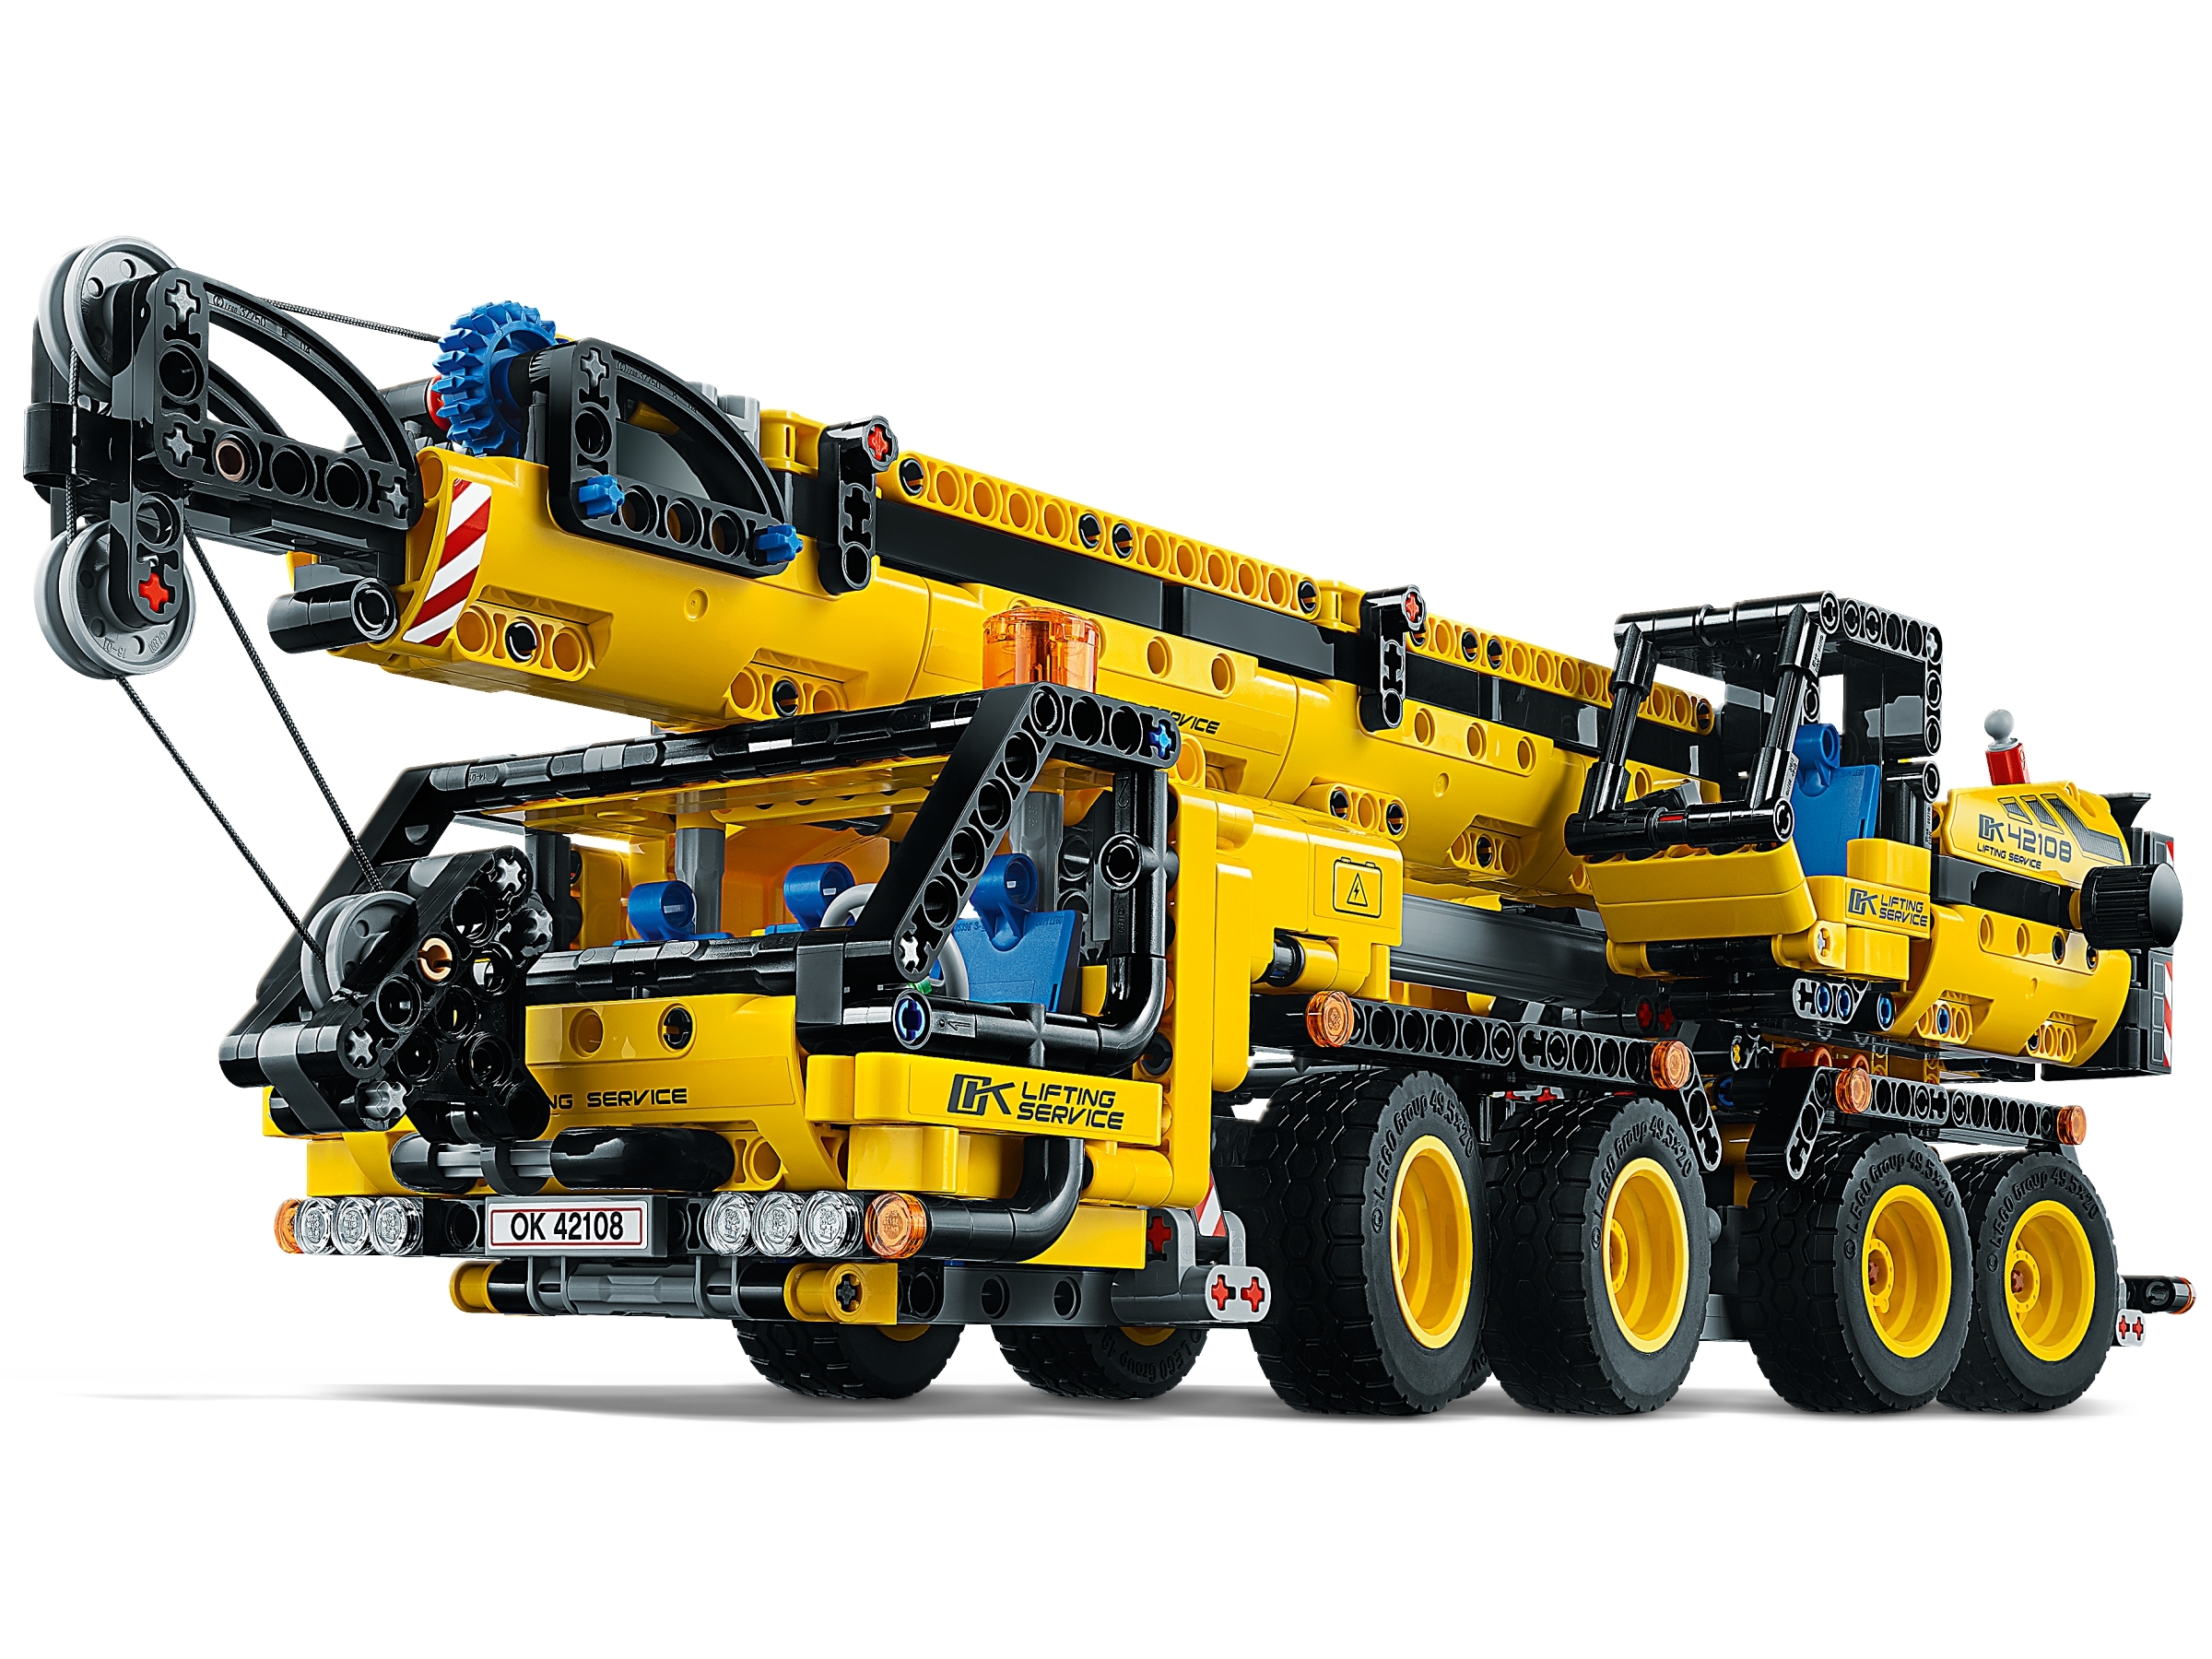 Mobile Crane 42108 | Technic | Buy online at the Official LEGO® Shop NL